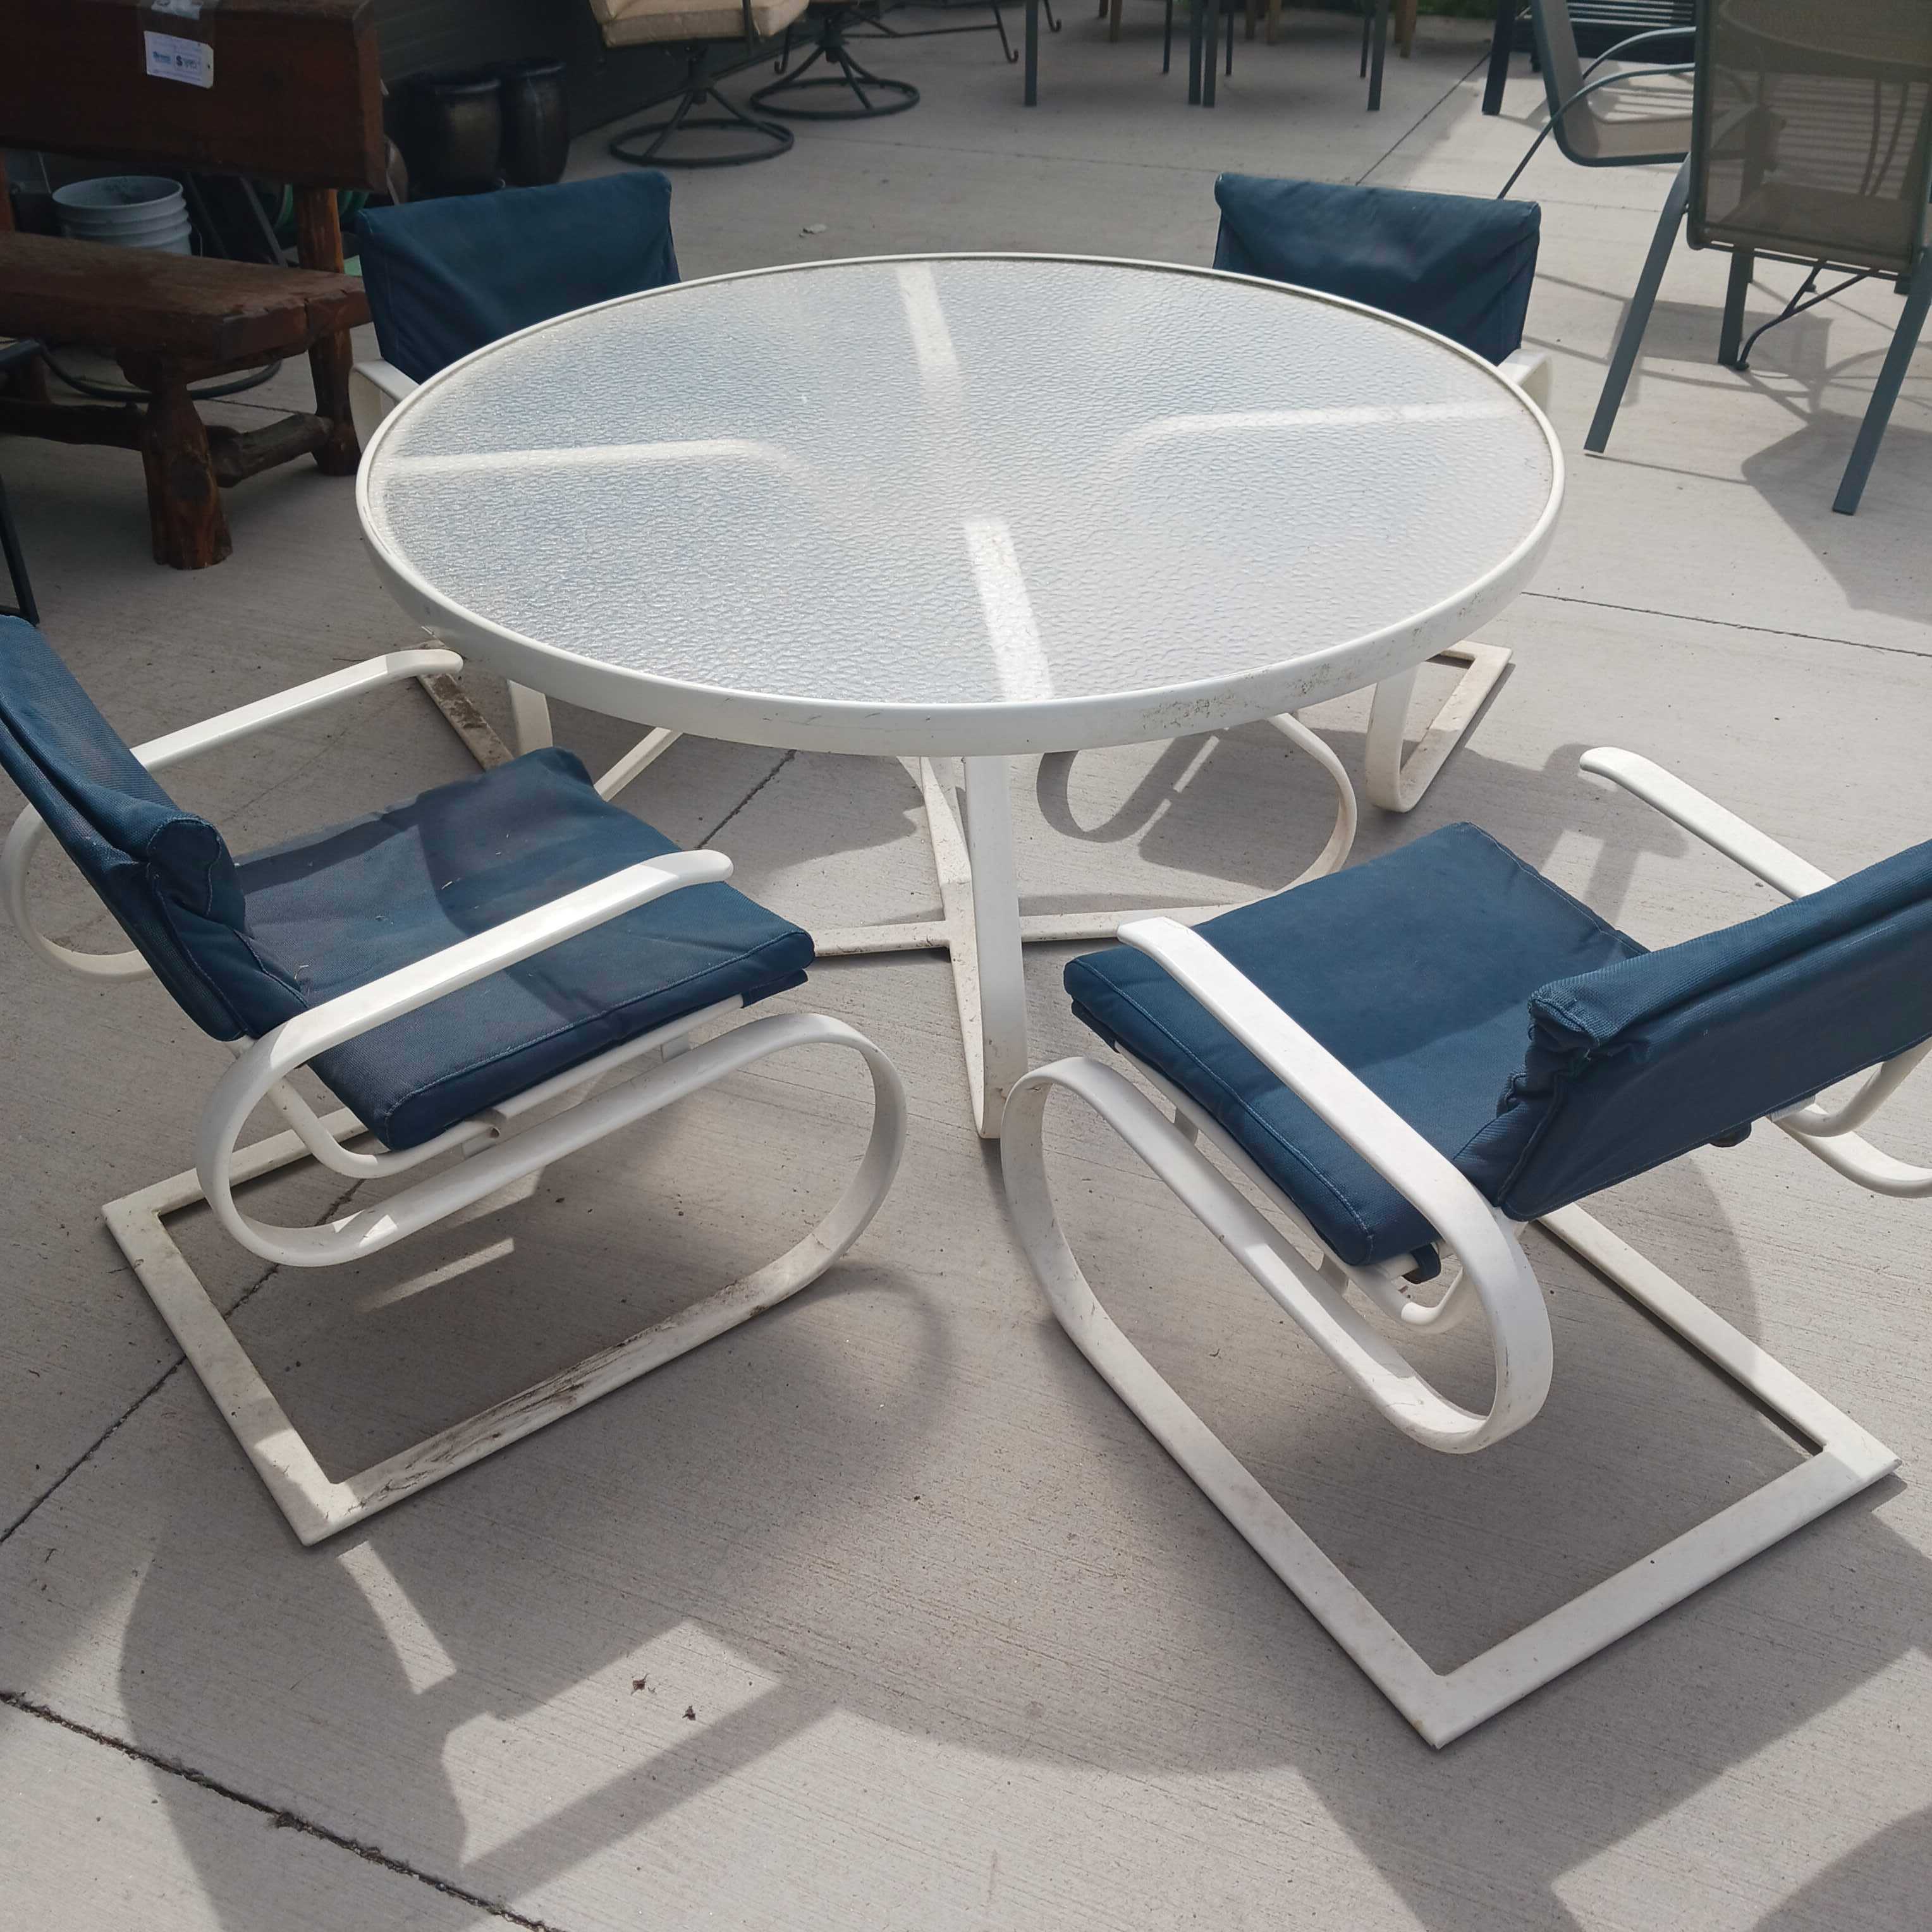 SET OF 5 Tropitone Aluminum Table with 4 Chairs Patio Dining Set